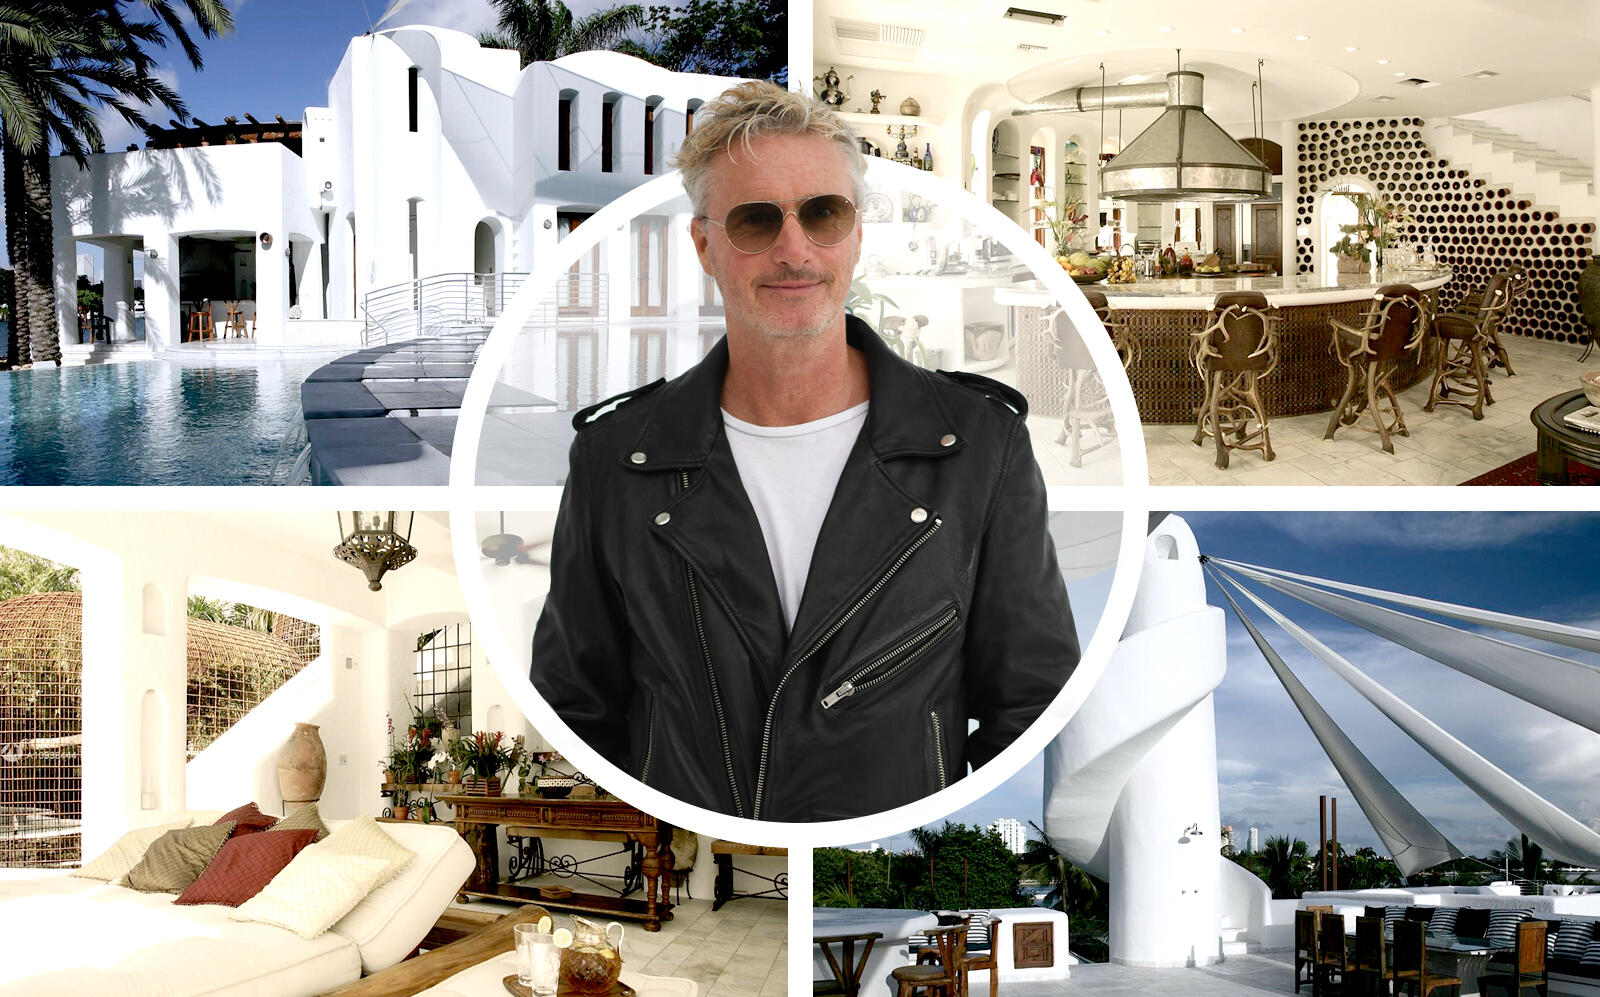 Eddie Irvine and his Hibiscus Island home. (Getty, Compass)